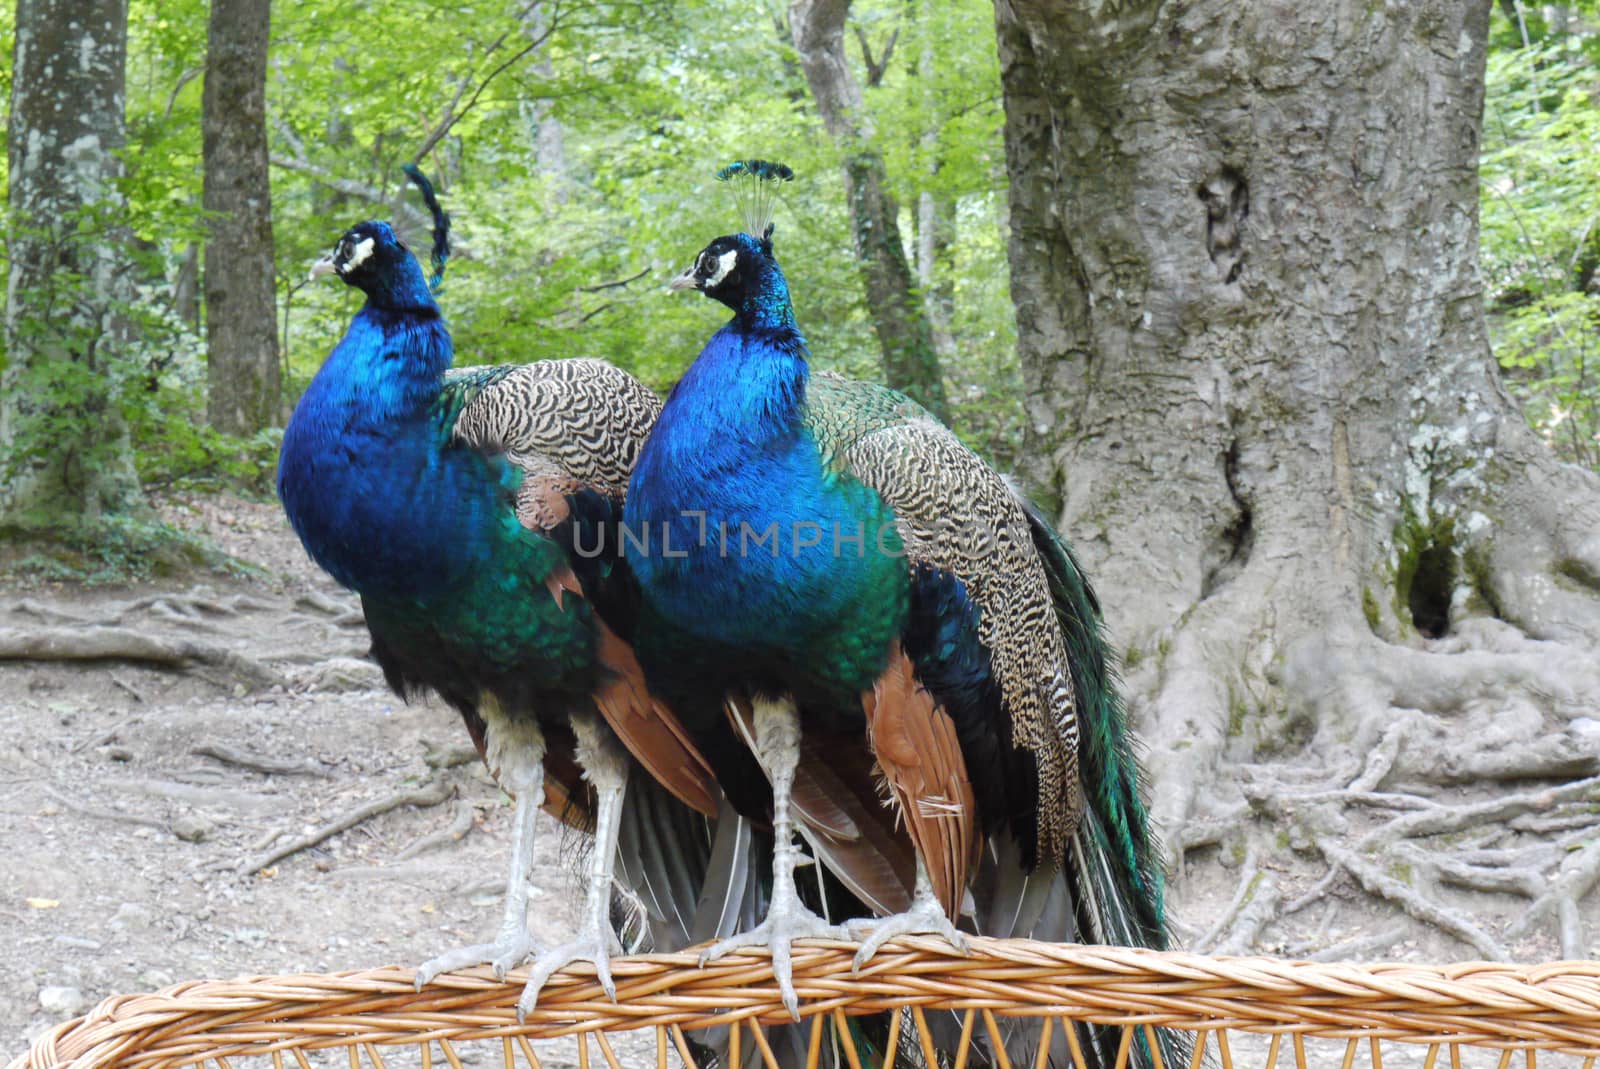 two beautiful blue-haired peacocks males sitting on a wicker basket in a park near a tree